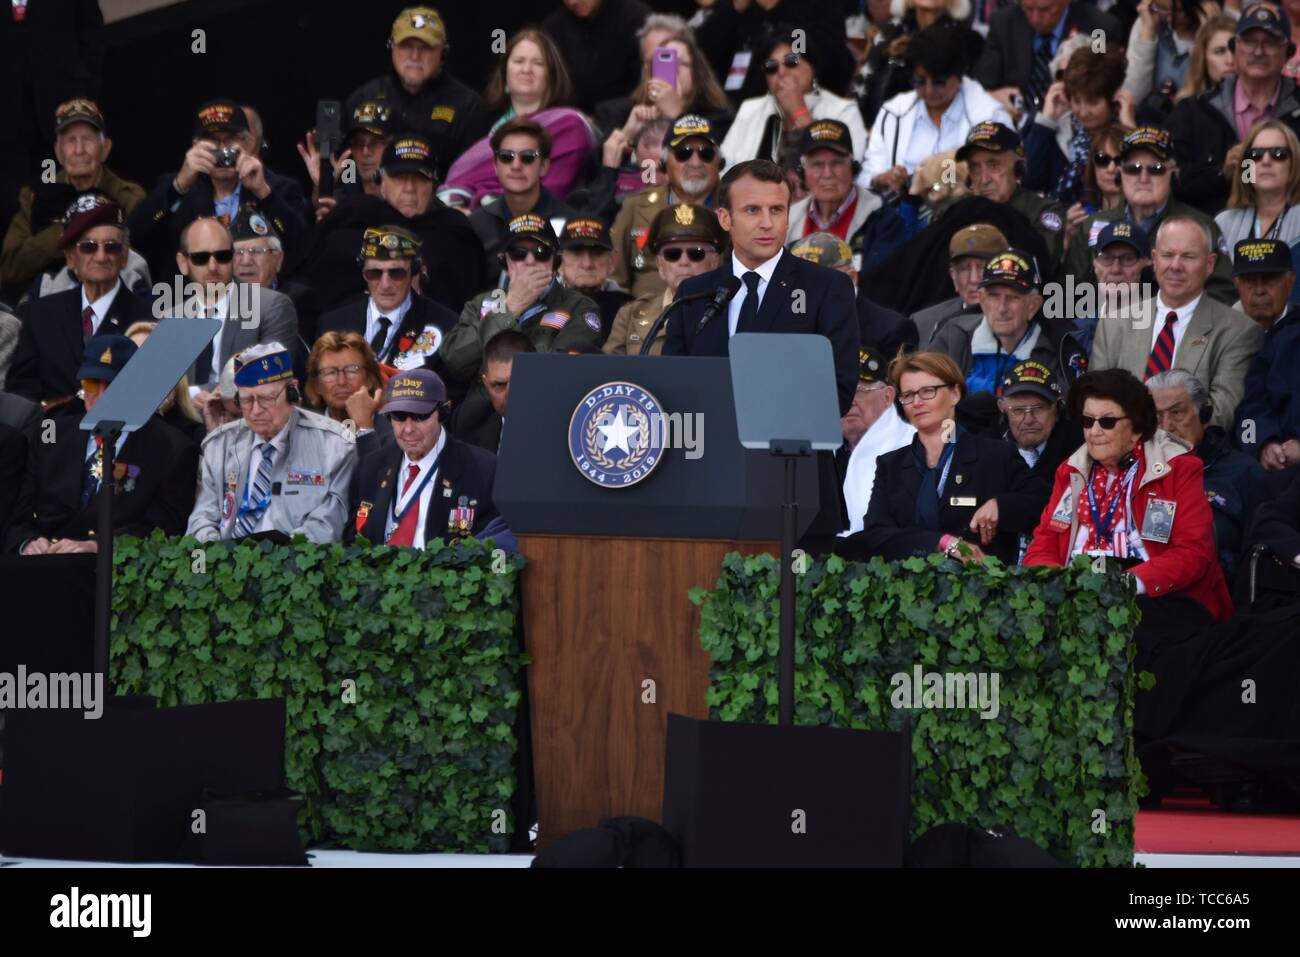 Colleville Sur Mer, France. 06th June, 2019. French President Emmanuel Macron addresses a commemoration ceremony marking the 75th D-Day Anniversary at the Normandy American Cemetery and Memorial June 6, 2019 in Colleville-sur-Mer, France. Thousands have converged on Normandy to commemorate the 75th anniversary of Operation Overlord, the WWII Allied invasion commonly known as D-Day. Credit: Planetpix/Alamy Live News Stock Photo